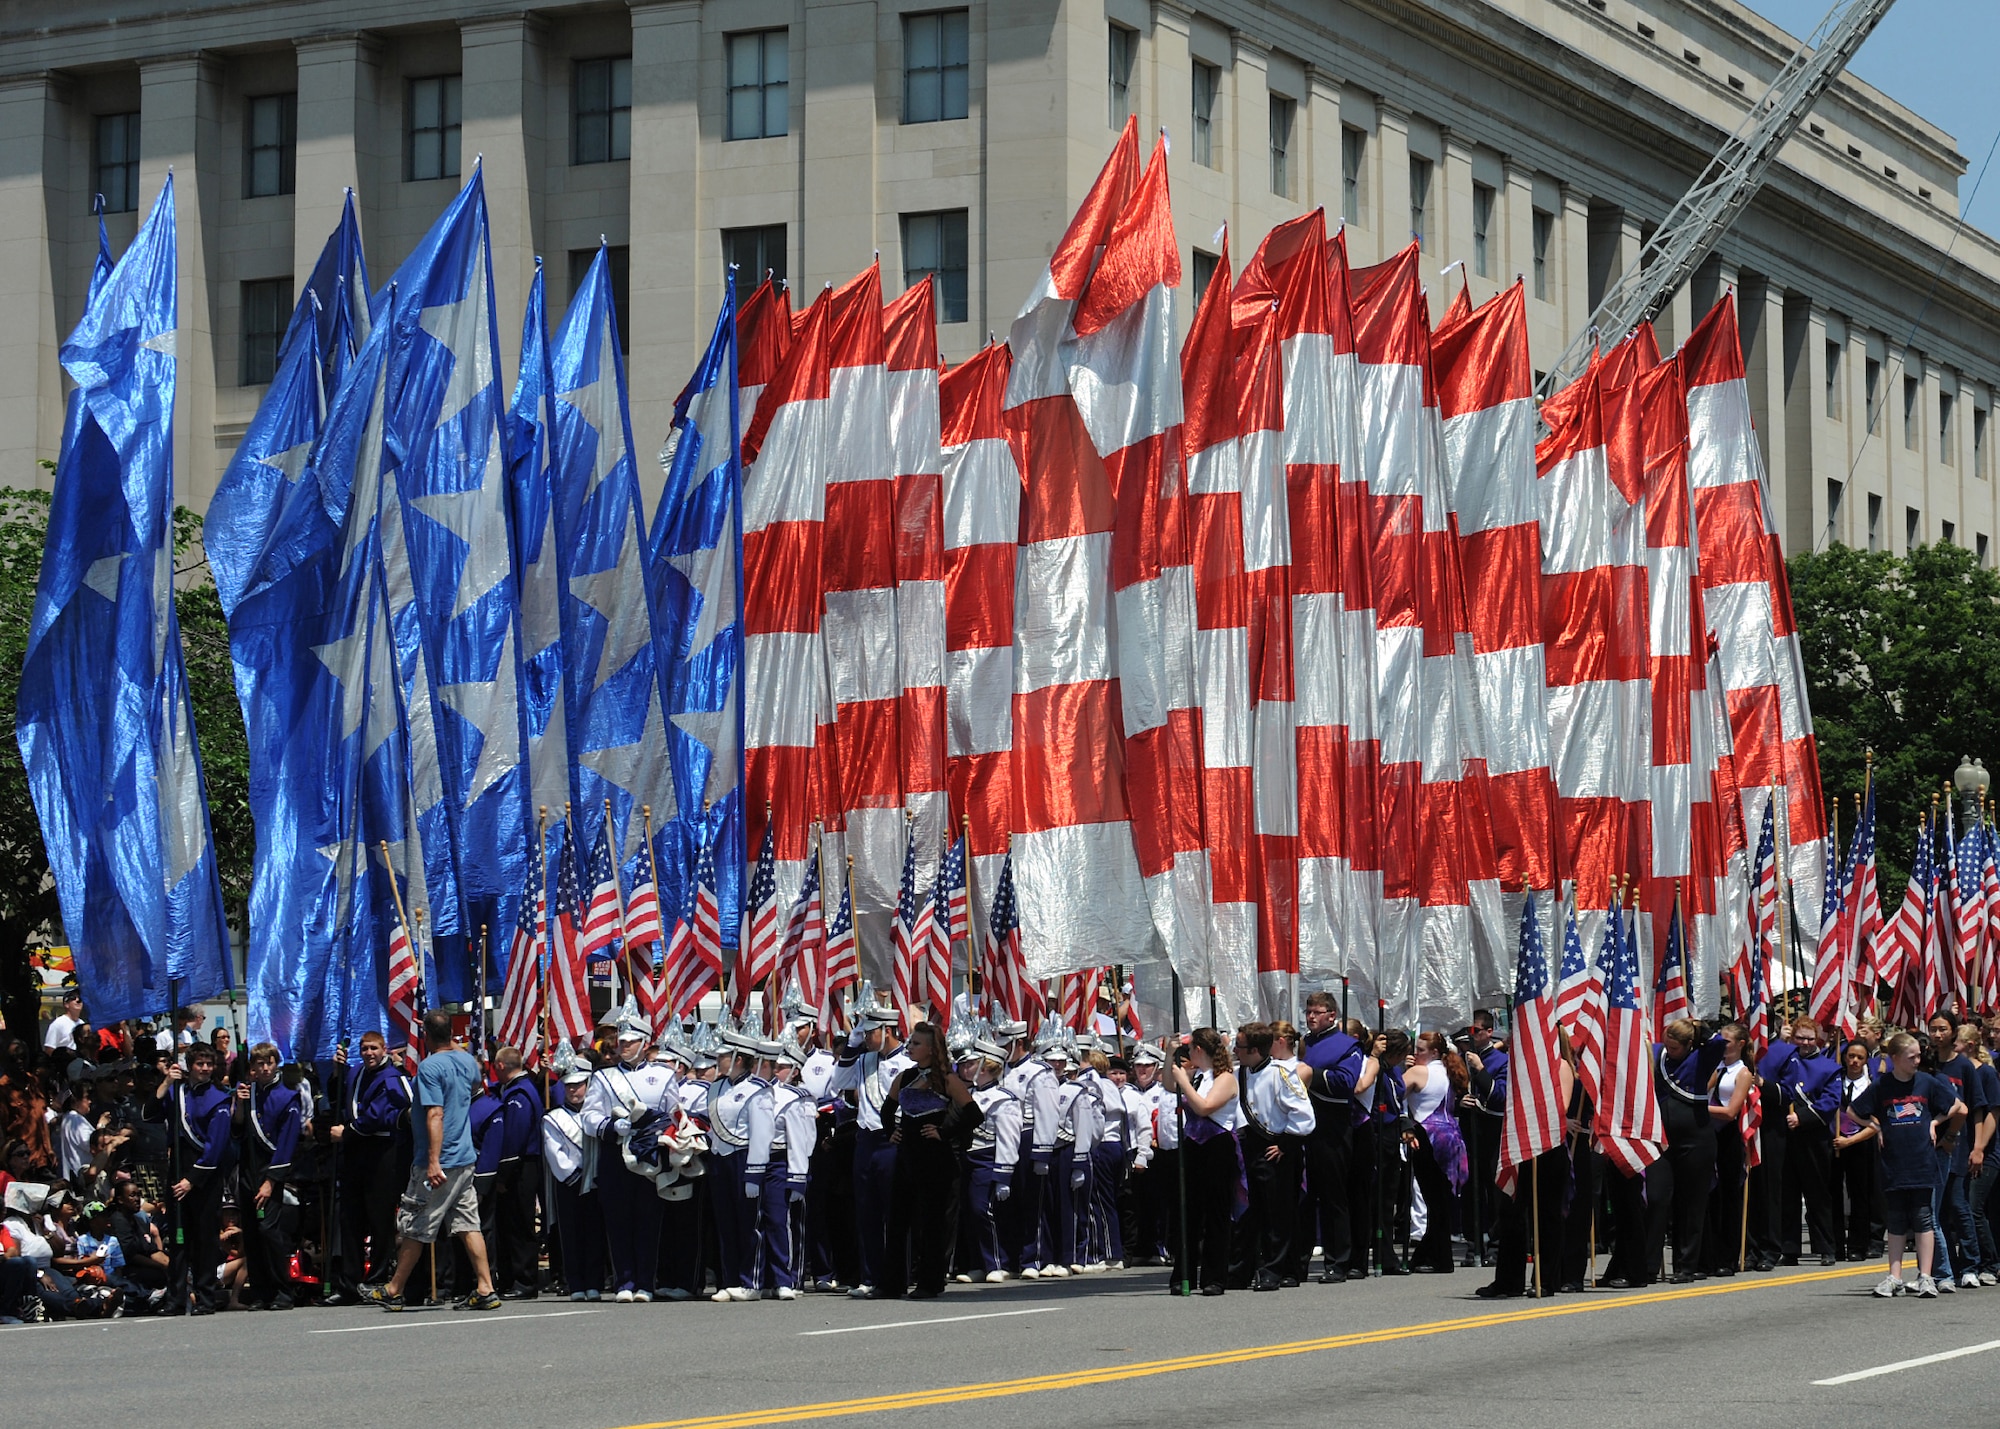 A precession of flags is carried by volunteers at the National Memorial Day Parade on May 28, 2012 in Washington D.C. The annual National Memorial Day Parade is an opportunity for thousands of patriotic Americans to come together and honor those who have sacrificed so much in service to our country.